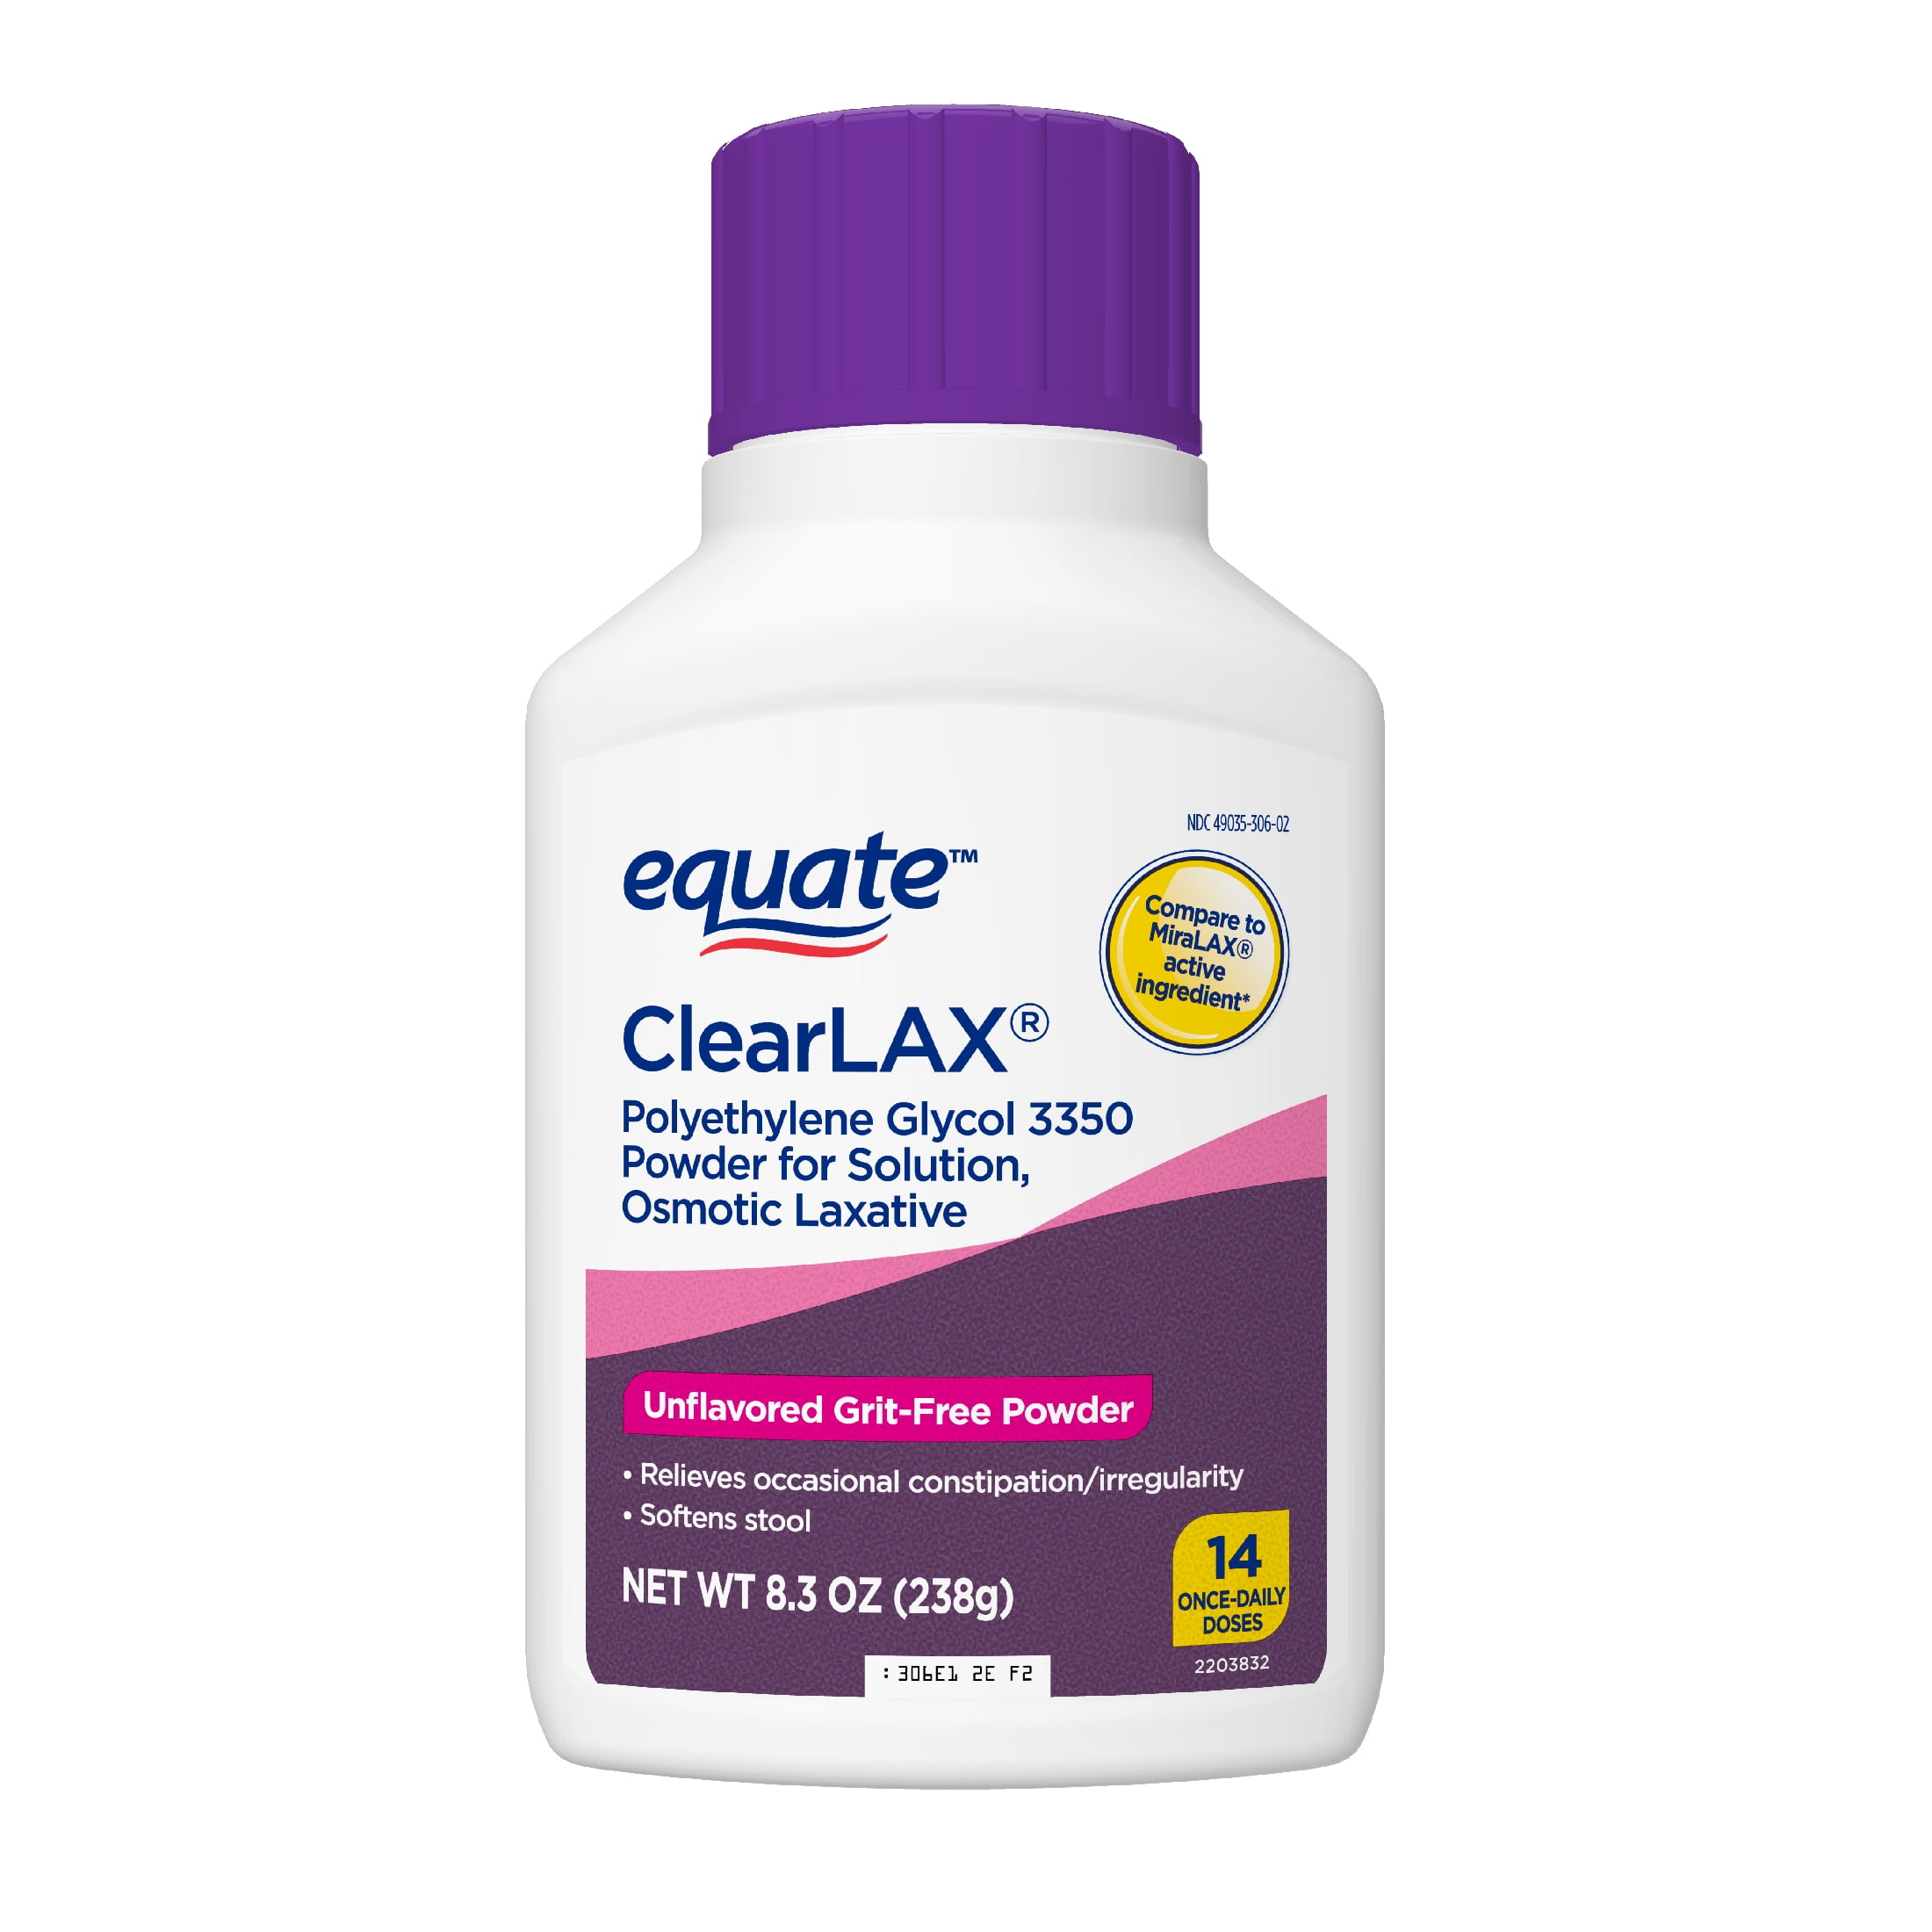 Equate ClearLax Polyethylene Glycol 3350 Powder for Solution, Osmotic Laxative, Softens Stool, Relieves Occasional Constipation, 8.3 Oz.